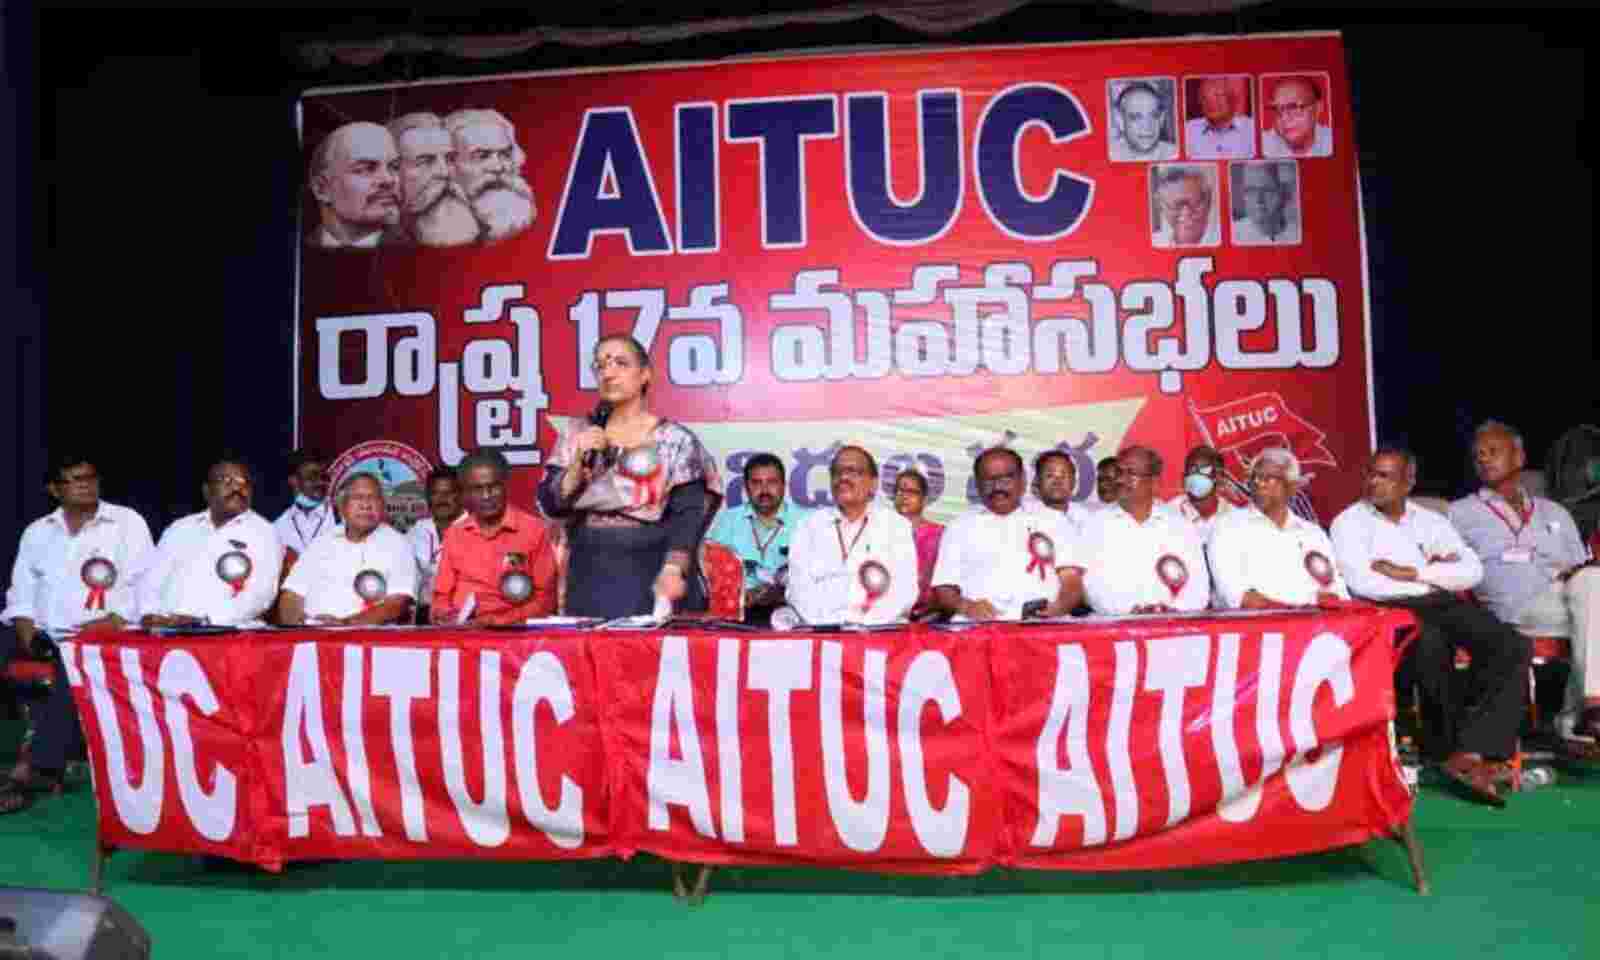 India: Poster for the 42nd National Conference of the AITUC - WFTU